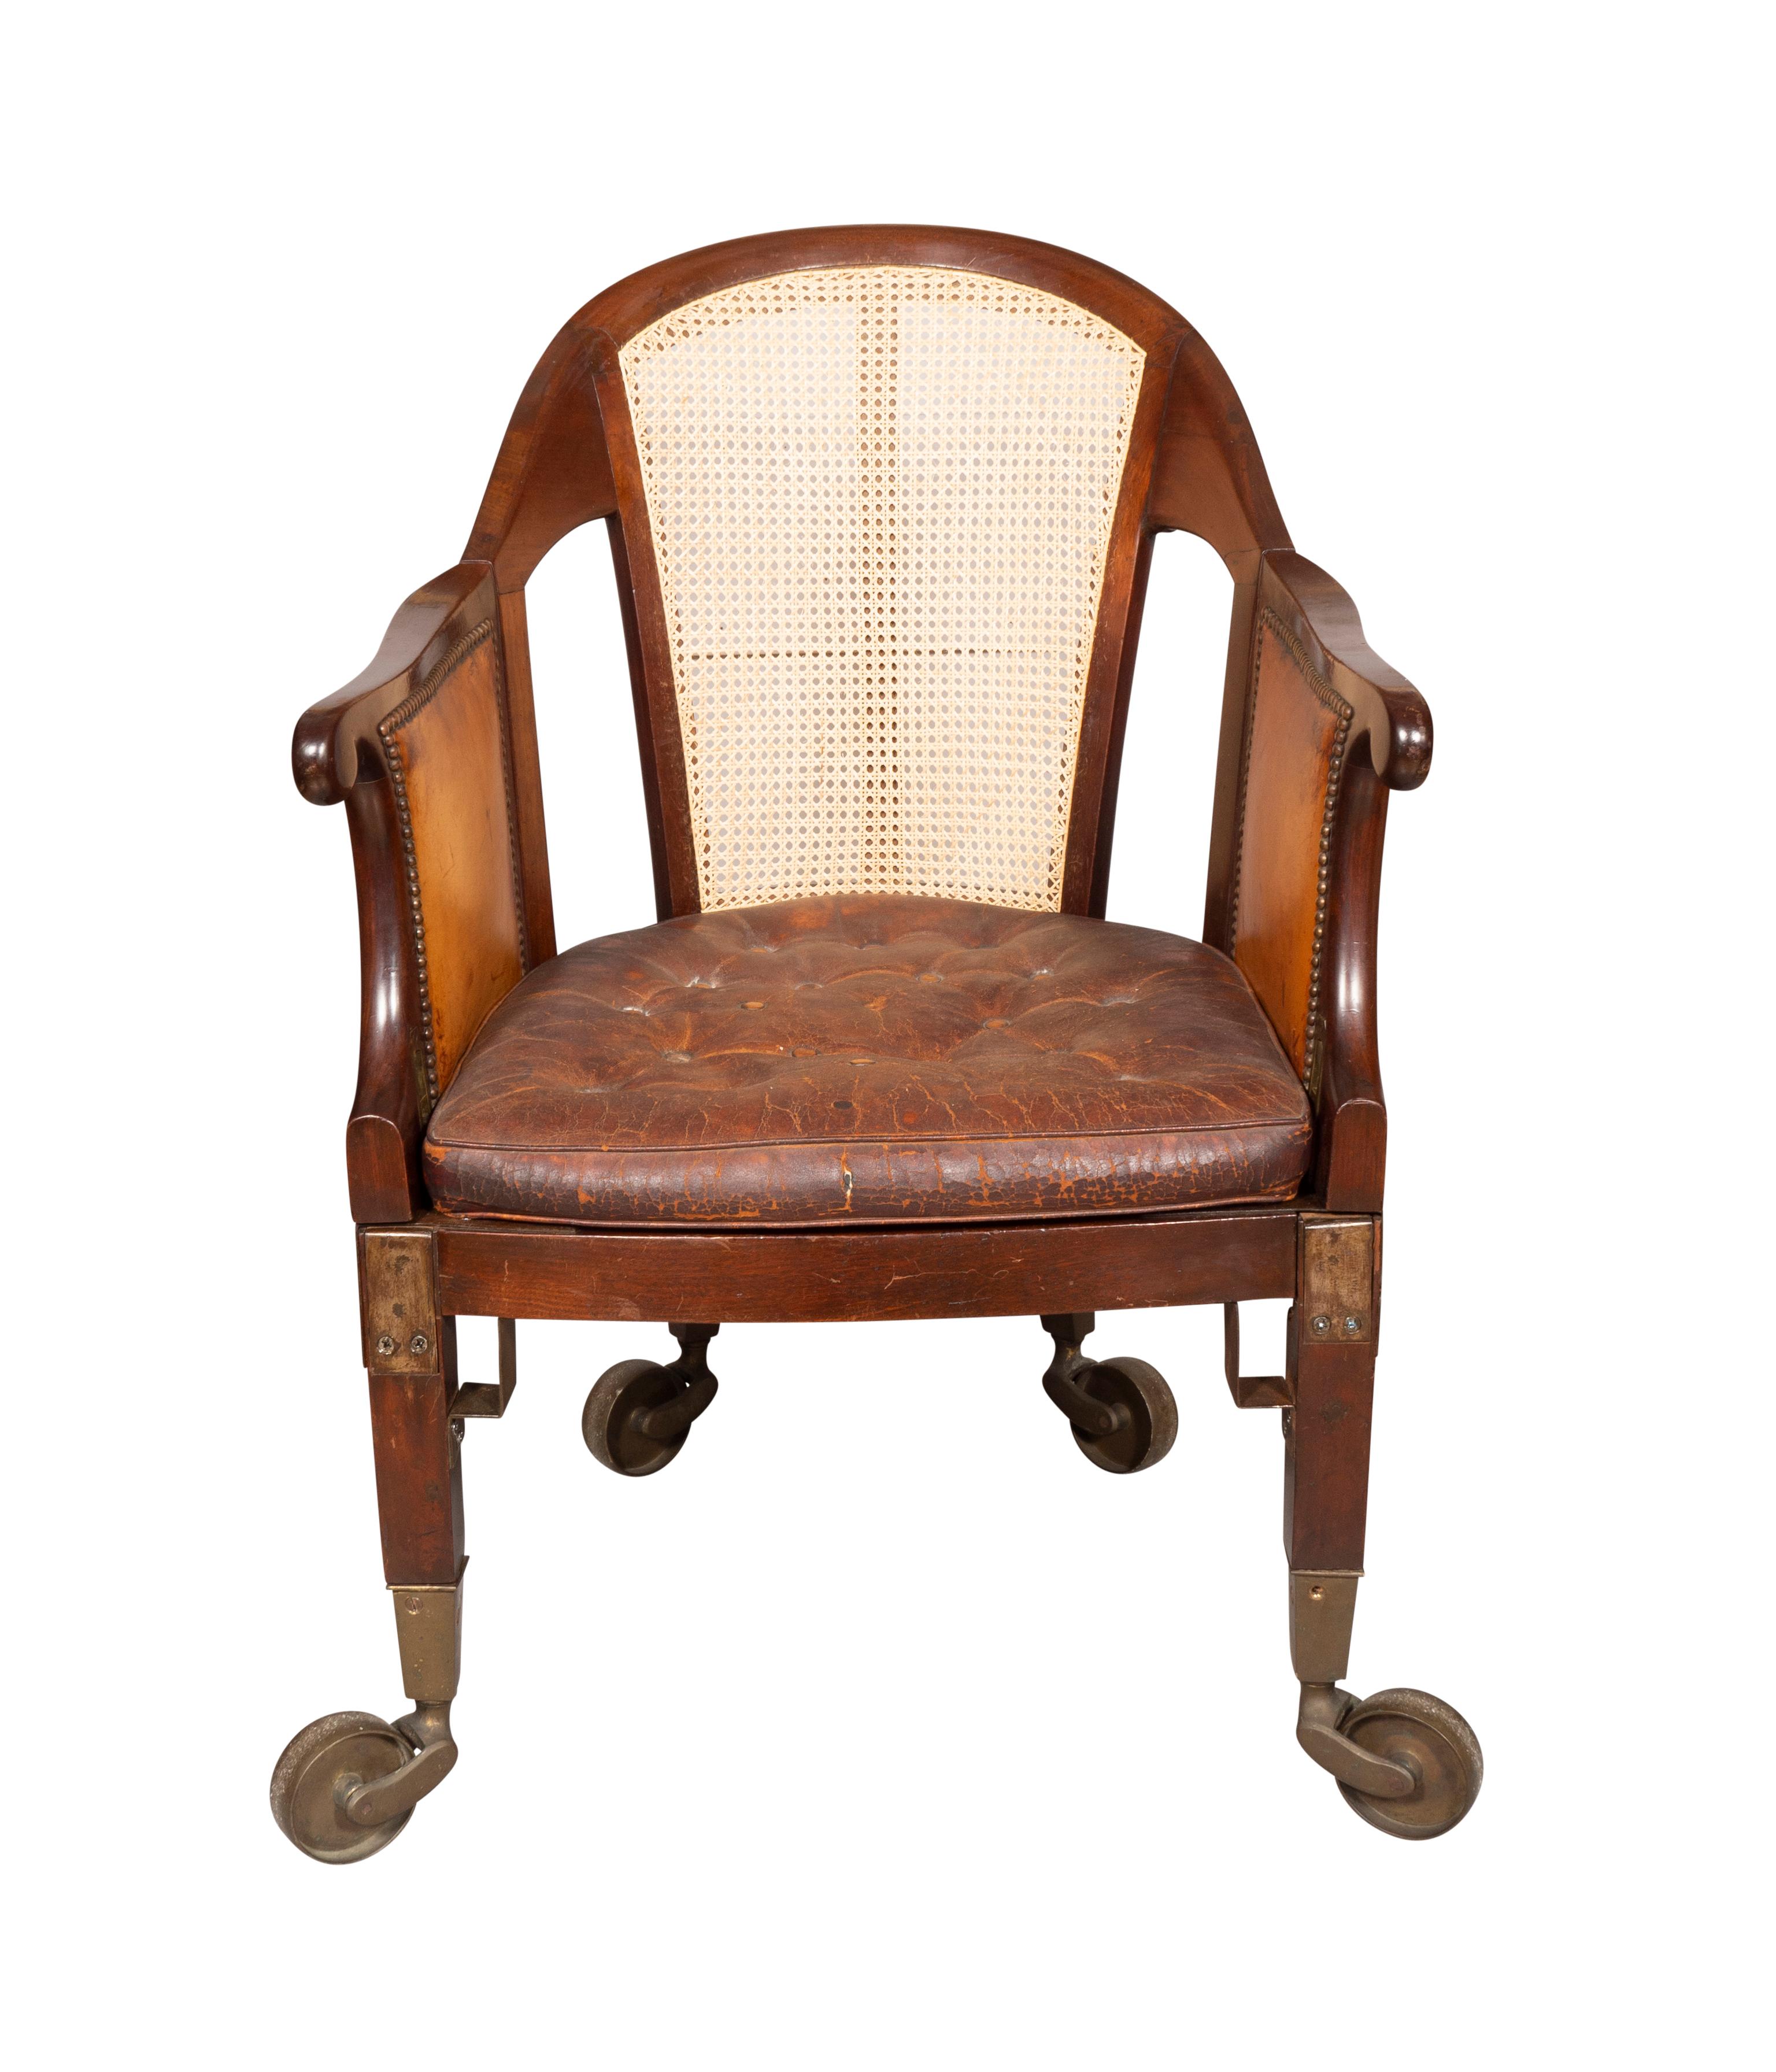 An unusual chair with arched back newly caned. The sides newly caned and the sides swing open to access easily. Raised on square section legs and very large brass casters .Leather cushion seat and sides.